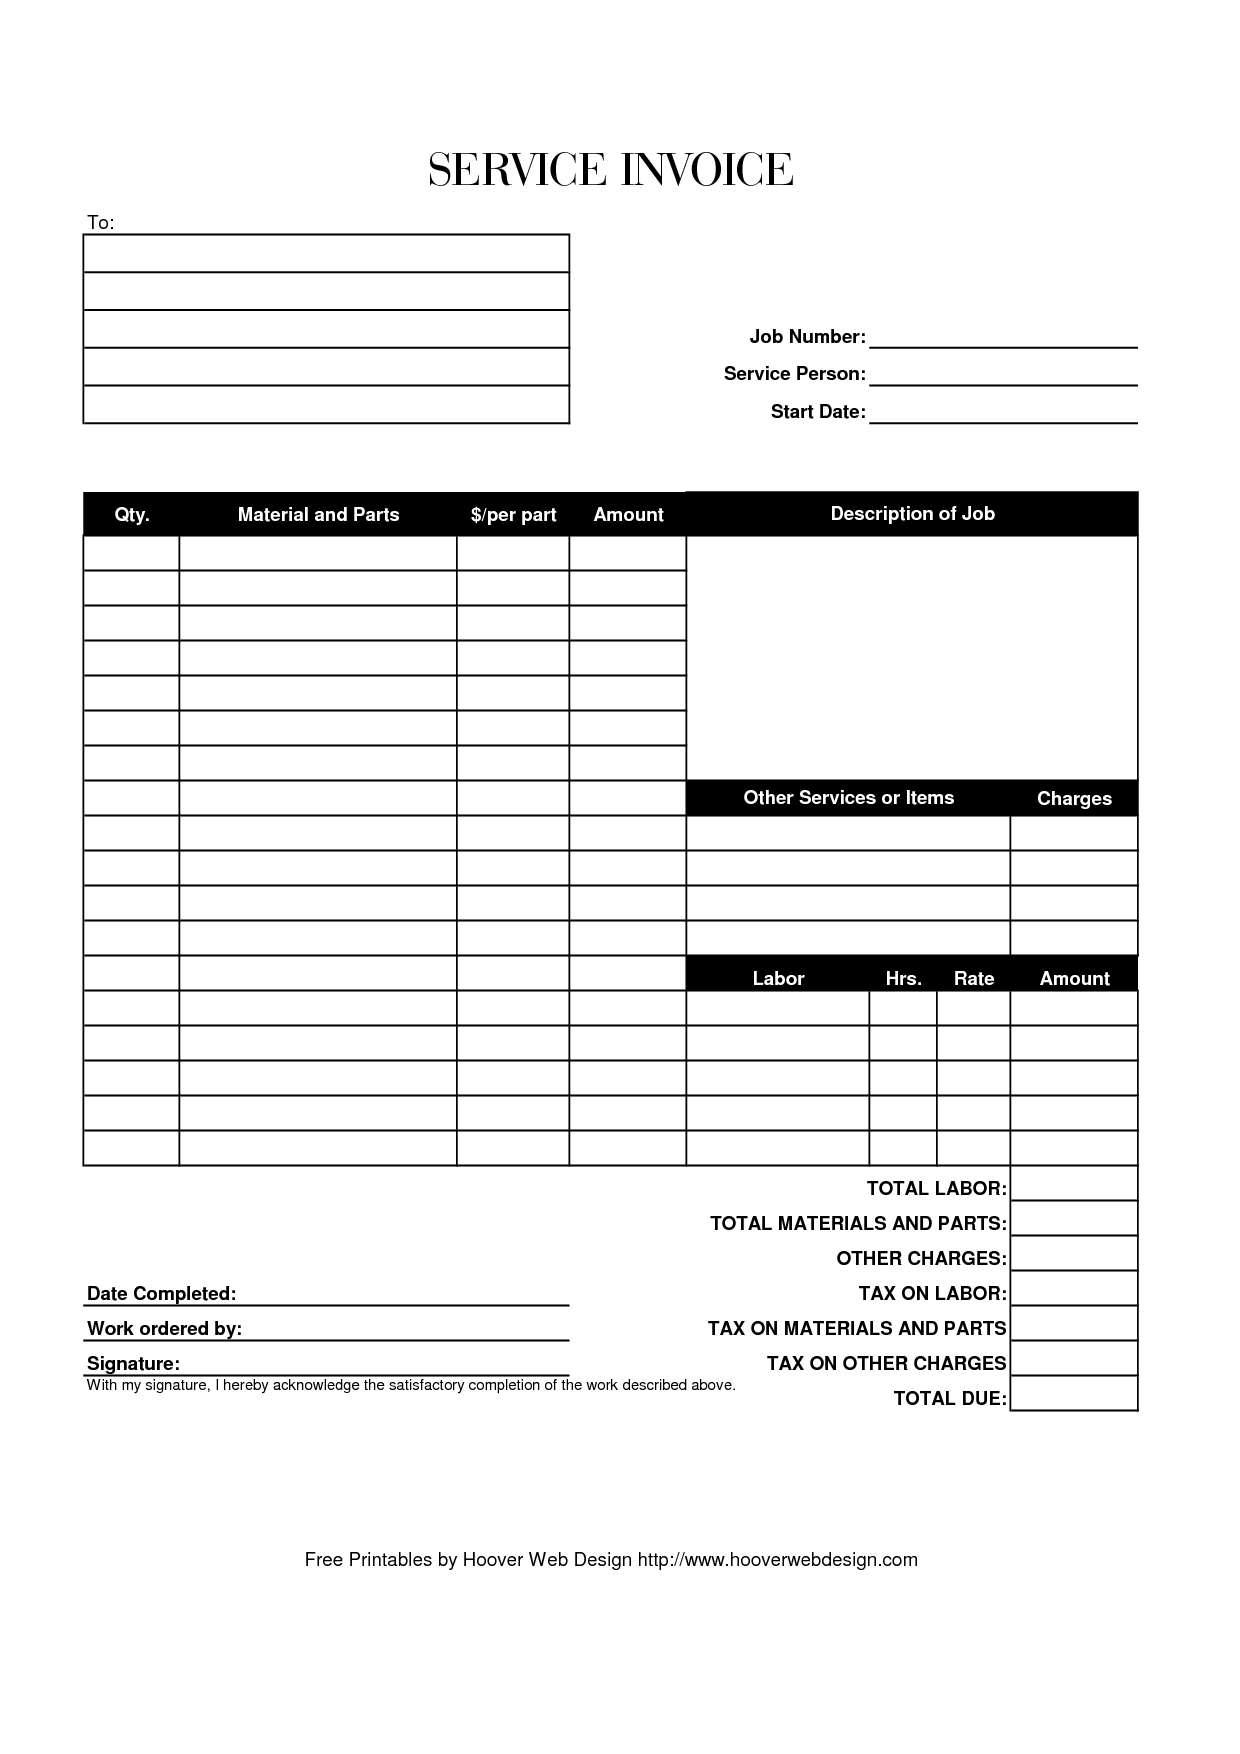 hoover receipts free printable service invoice template service invoices templates free